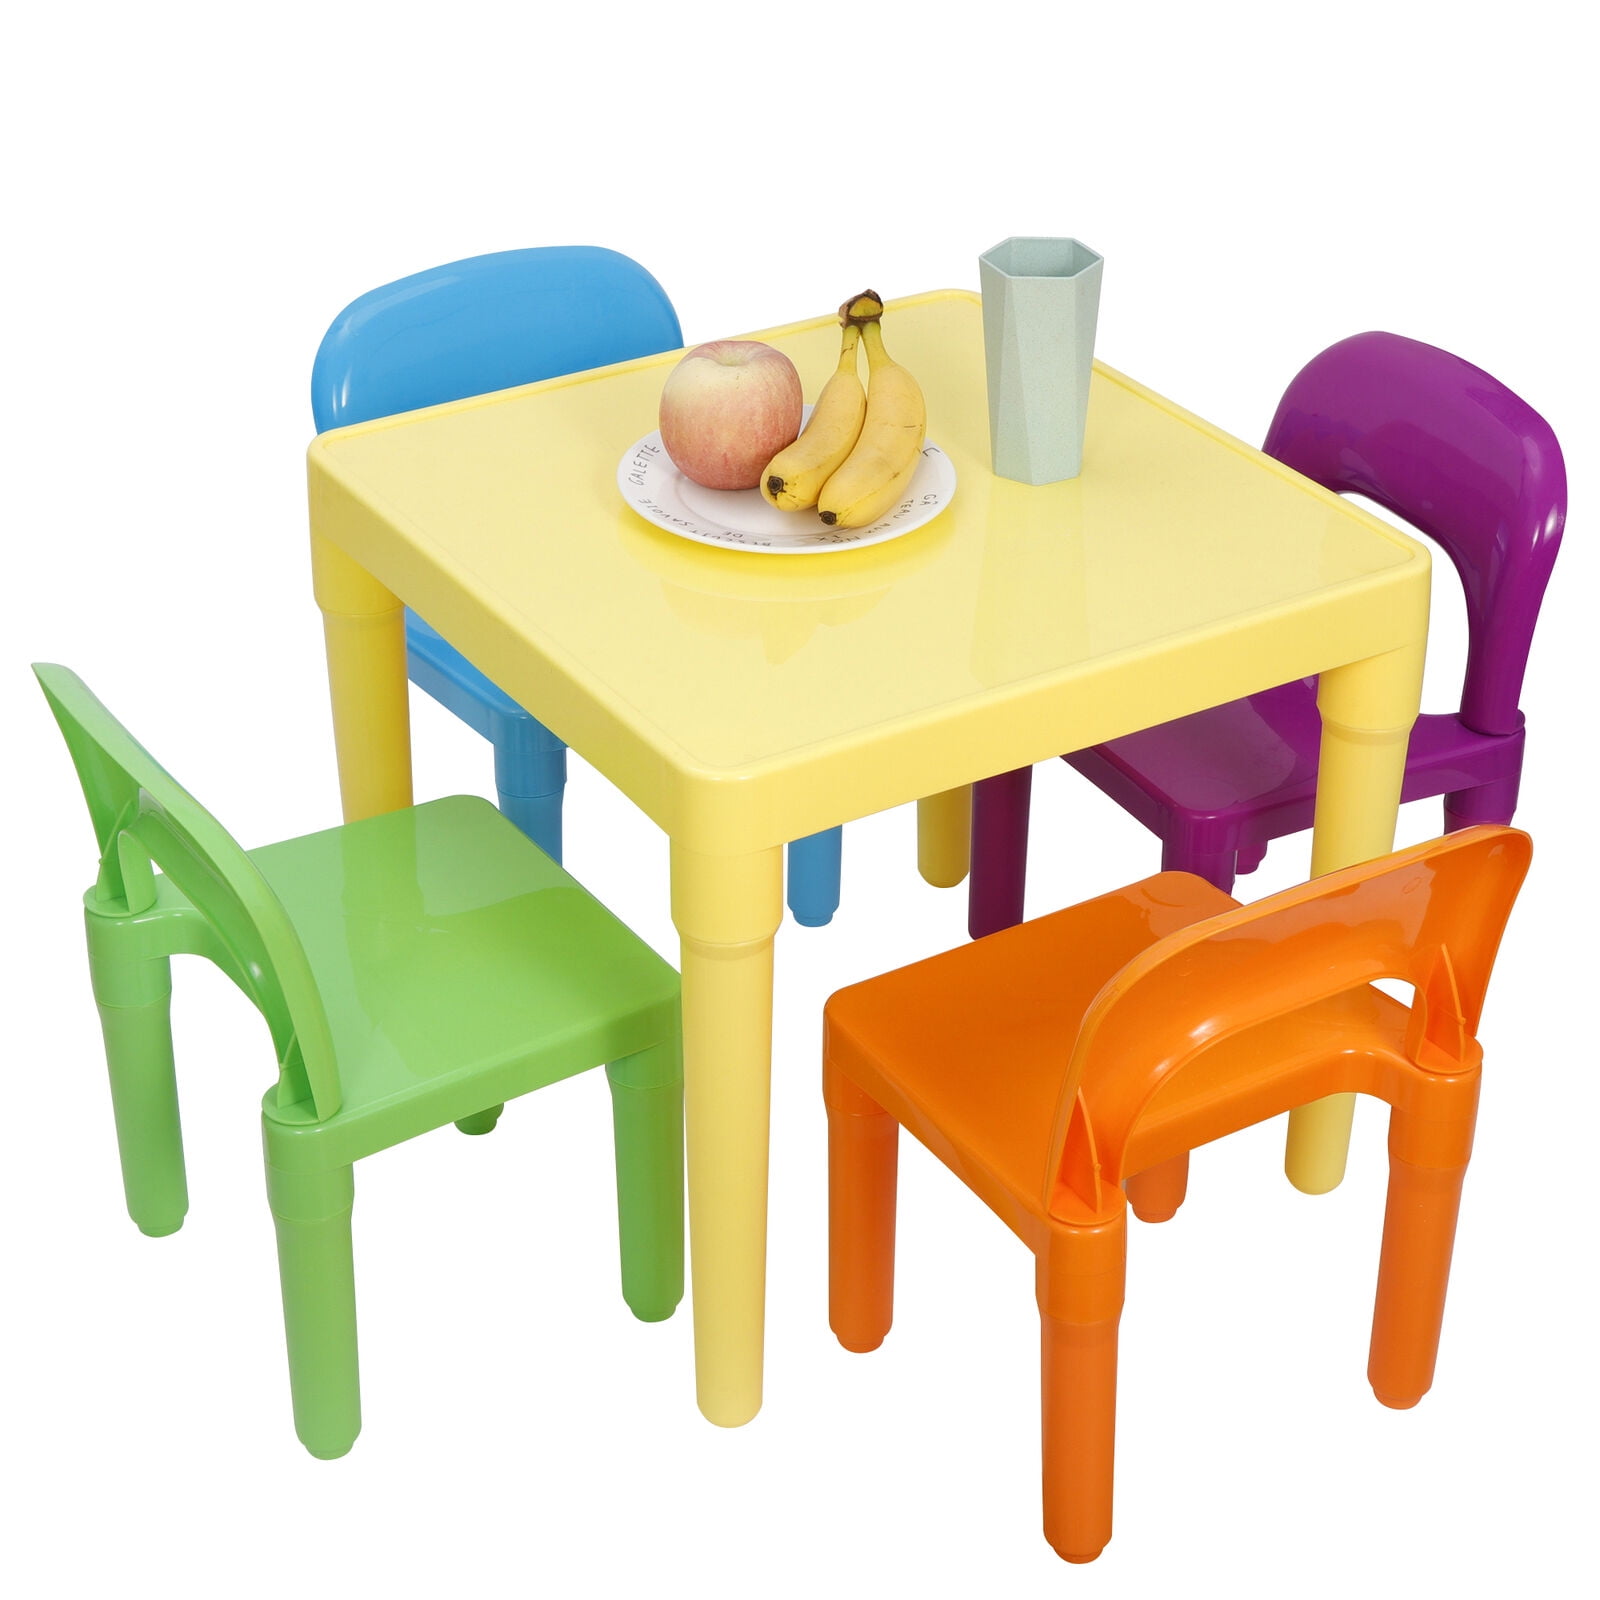 Child Kids Plastic Table And Chair Set Activity Toddler Toy Play Home Furniture 